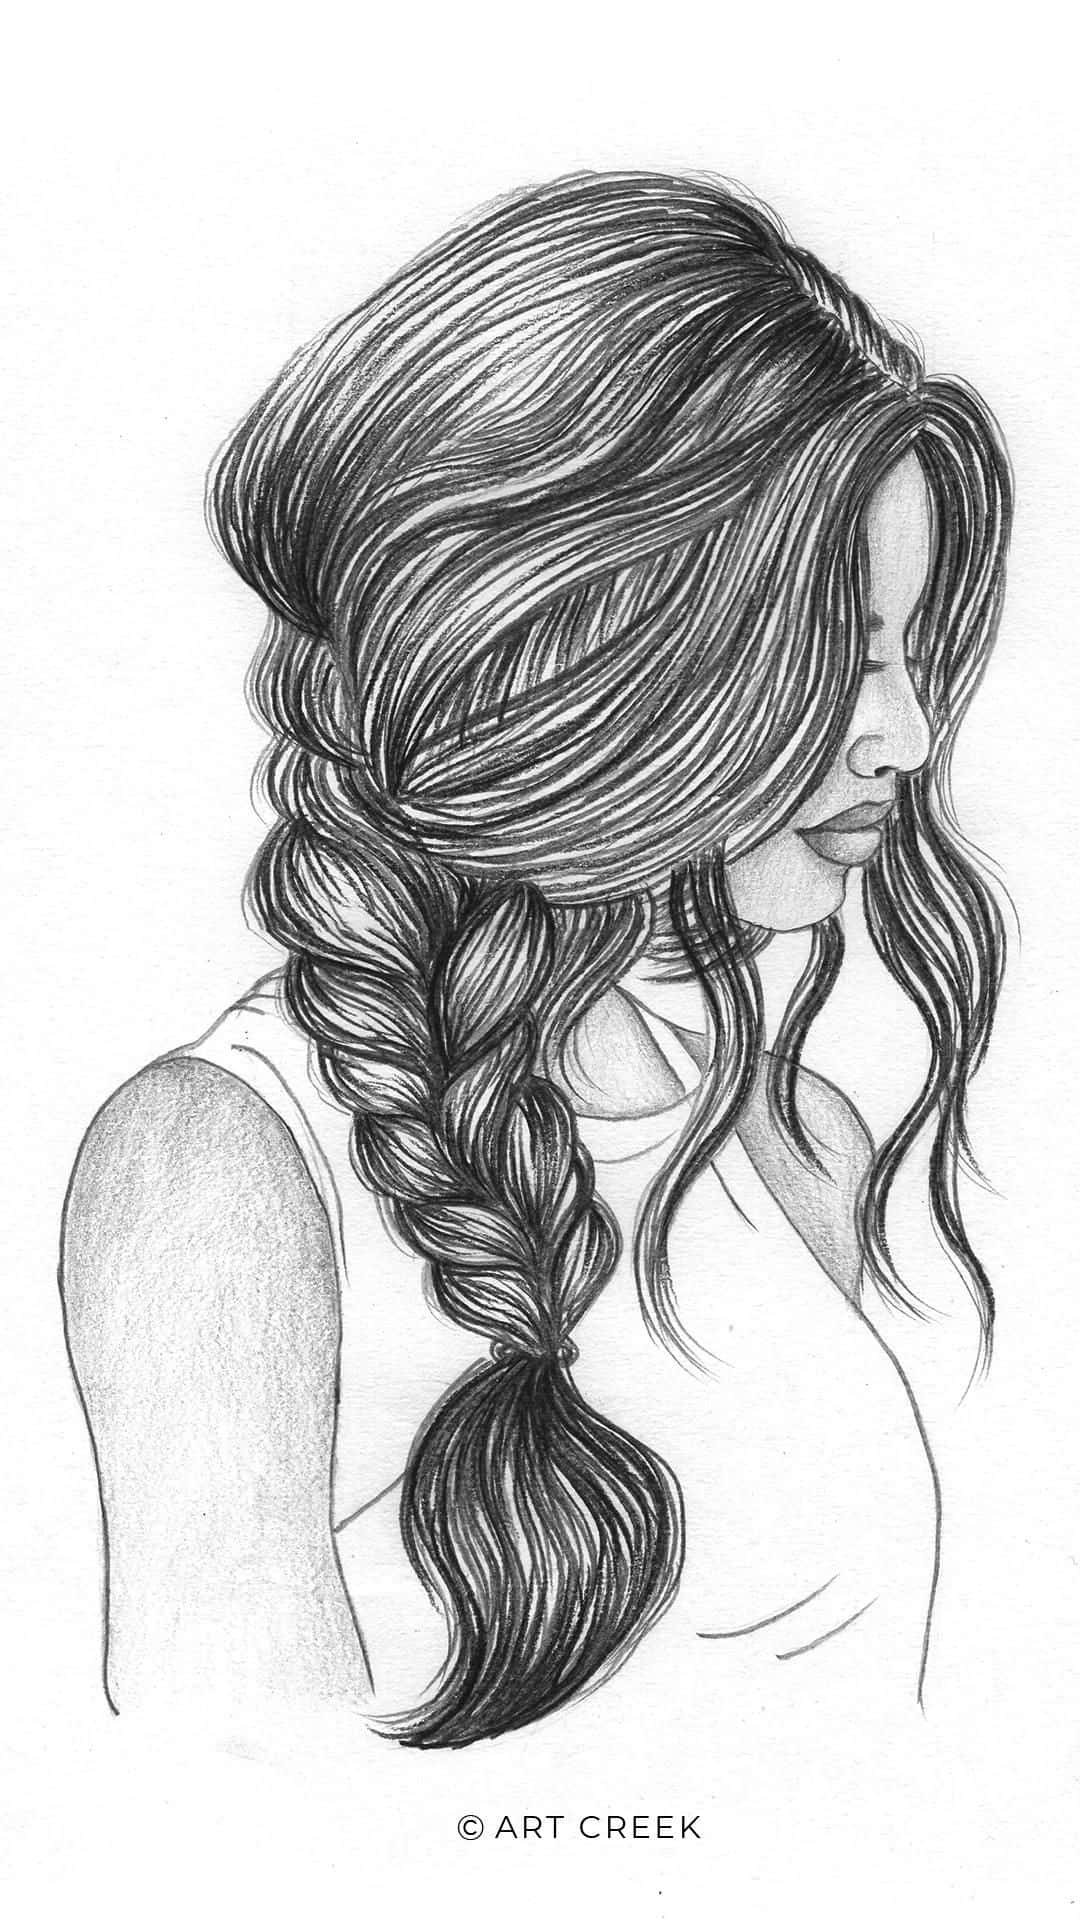 12737 Woman Side View Drawing Images Stock Photos  Vectors  Shutterstock